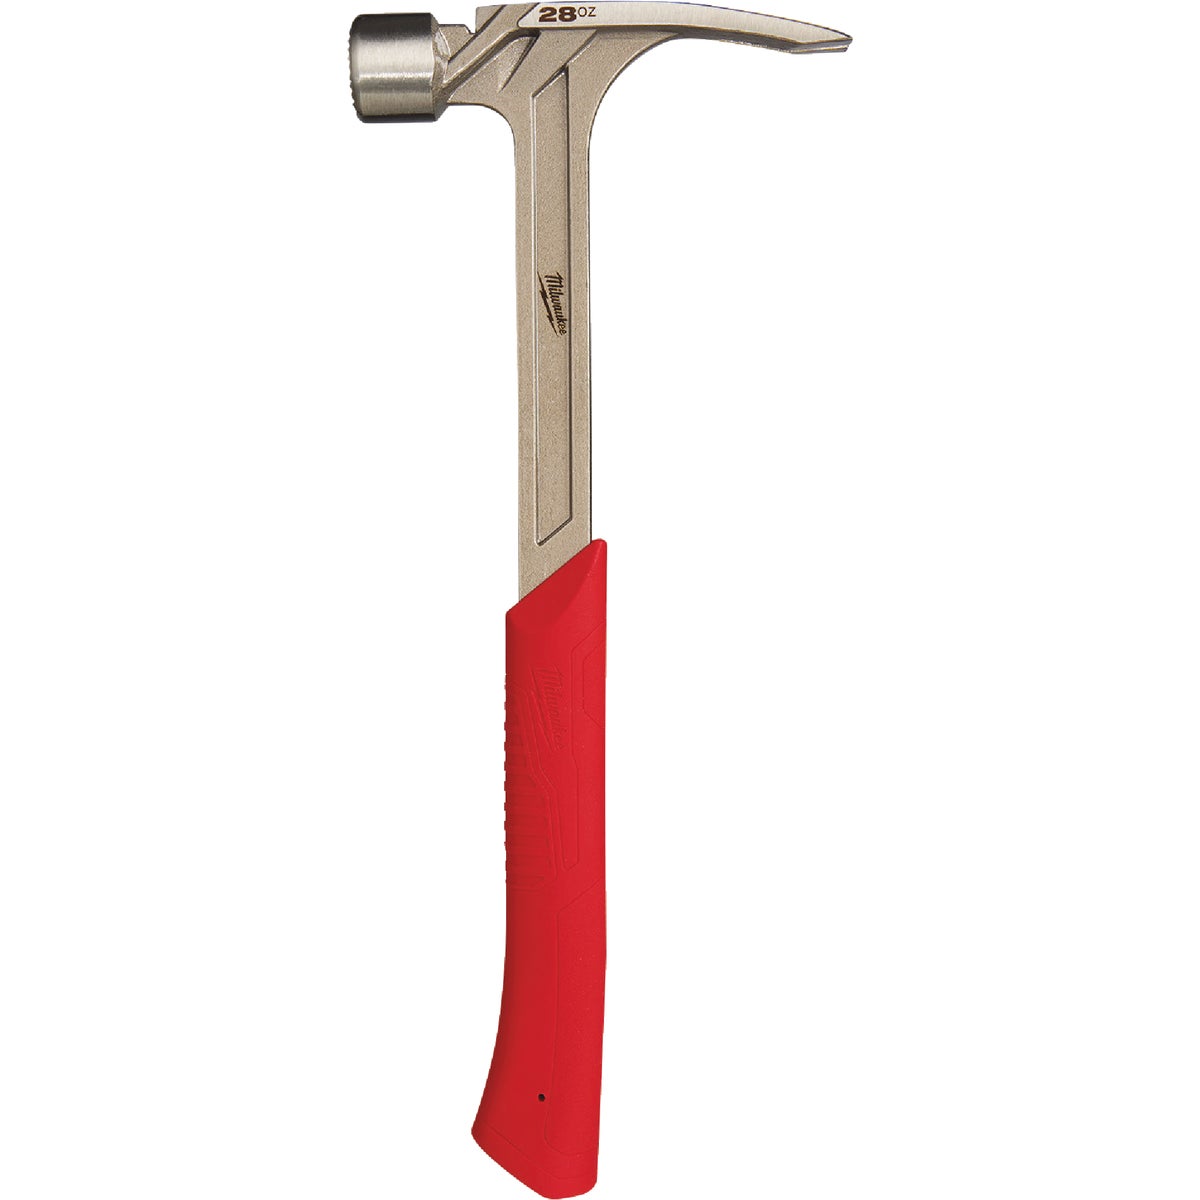 Milwaukee 28 Oz. Milled-Face Framing Hammer with Steel I-Beam Handle